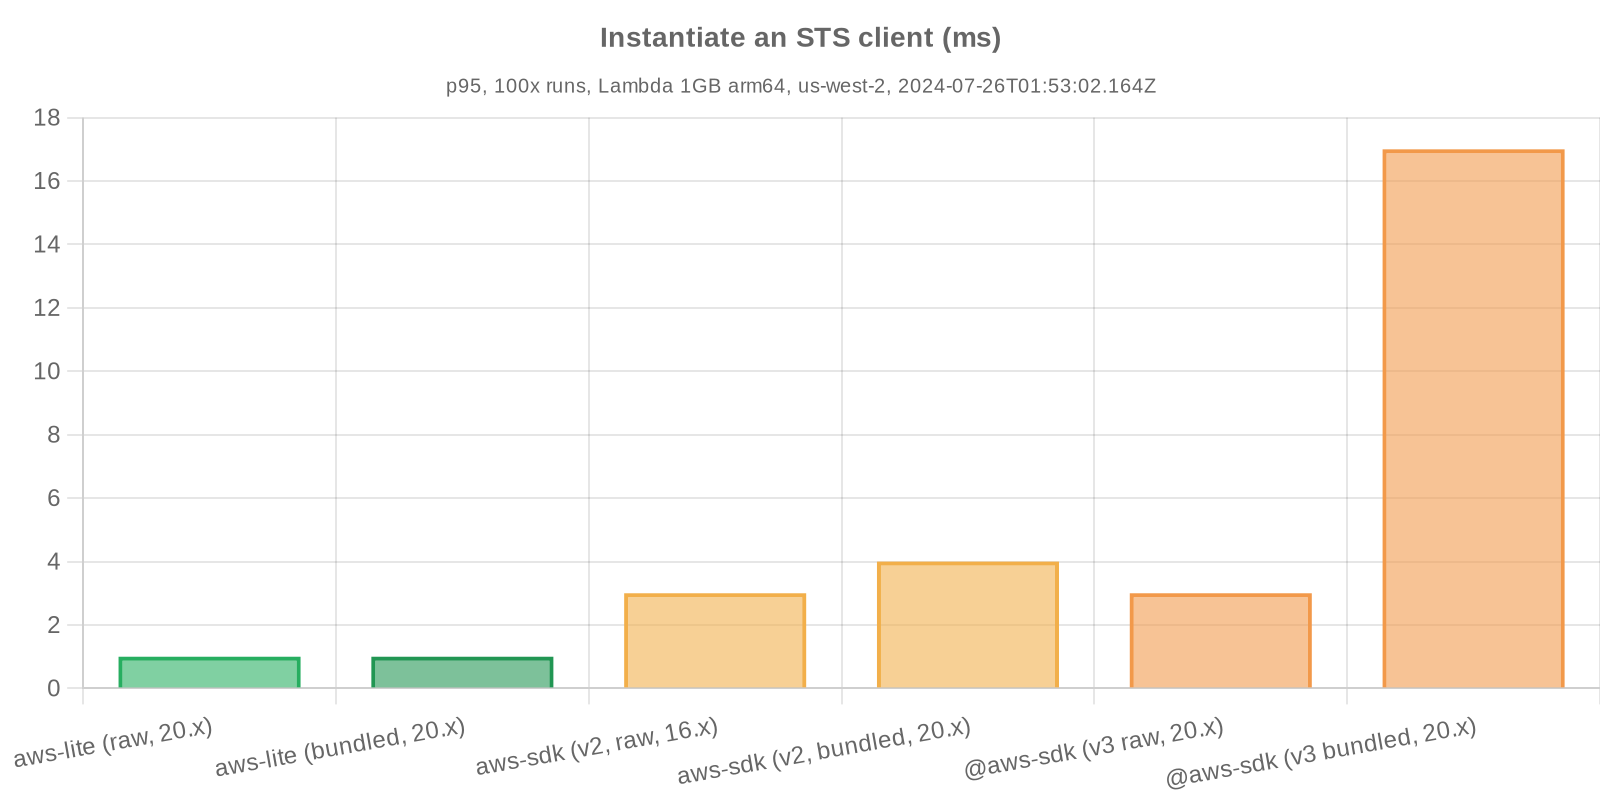 Benchmark statistics - Instantiate a STS client